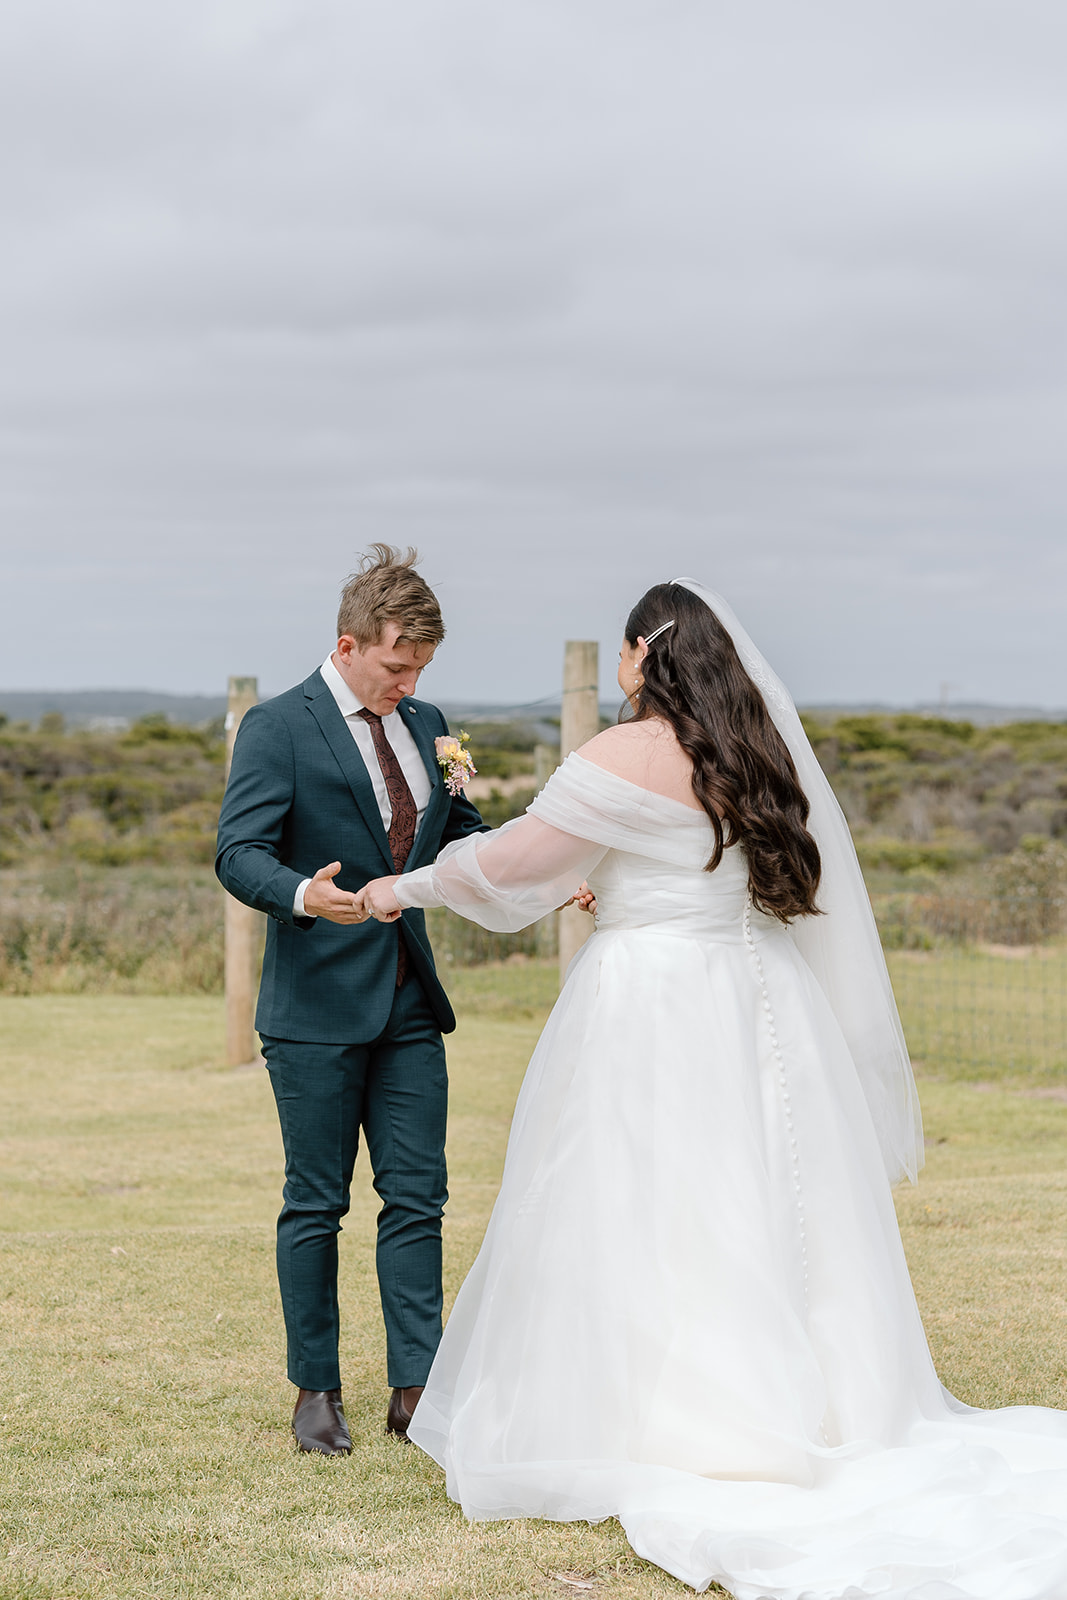 Should you have a first look on your elopement day?